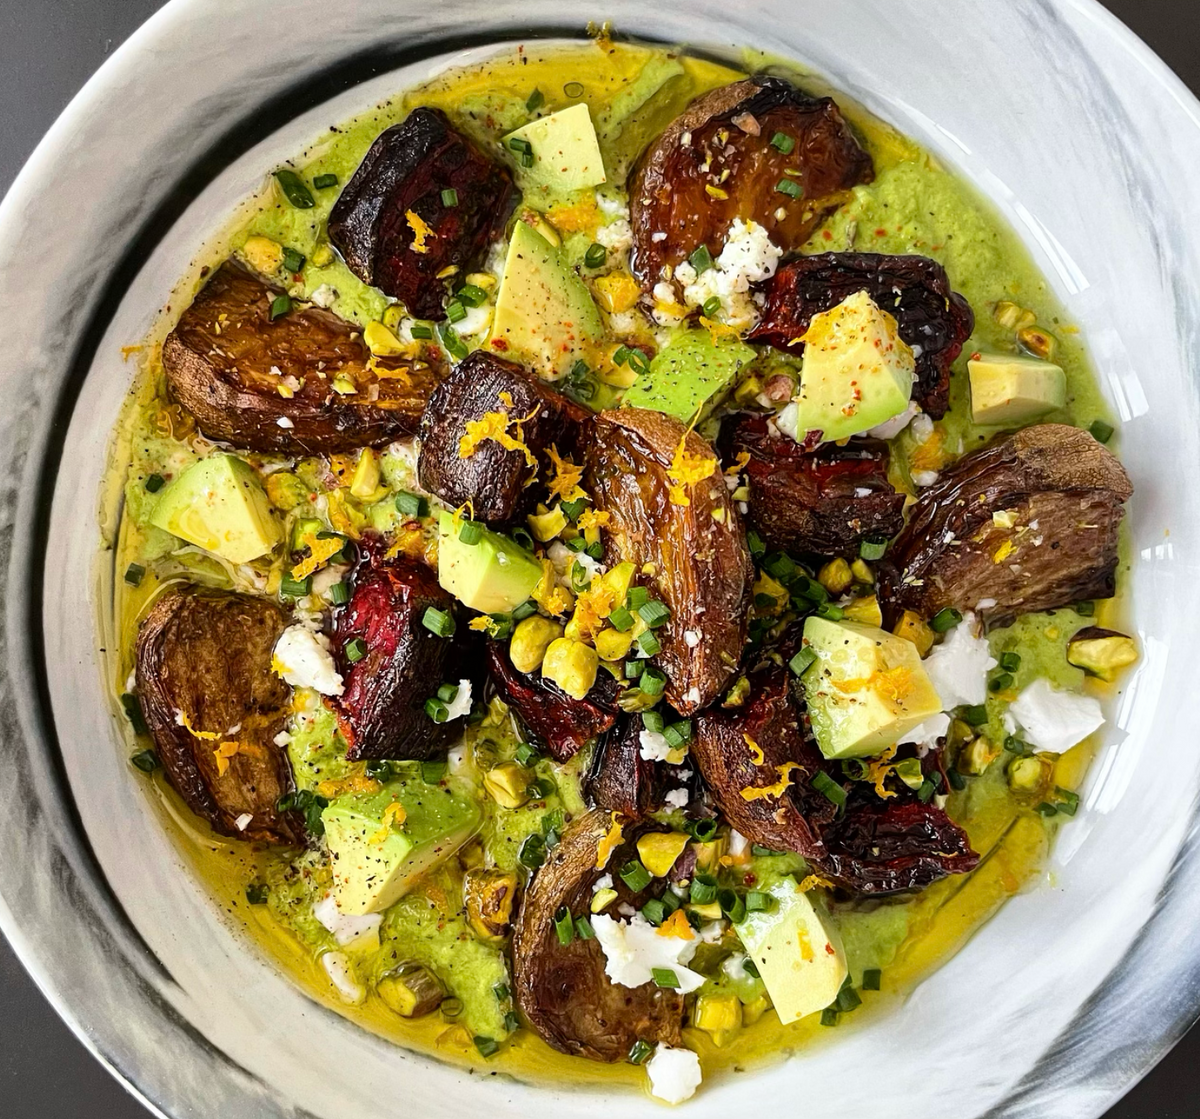 photo of beetroot in a bowl with avocado in a green sauce